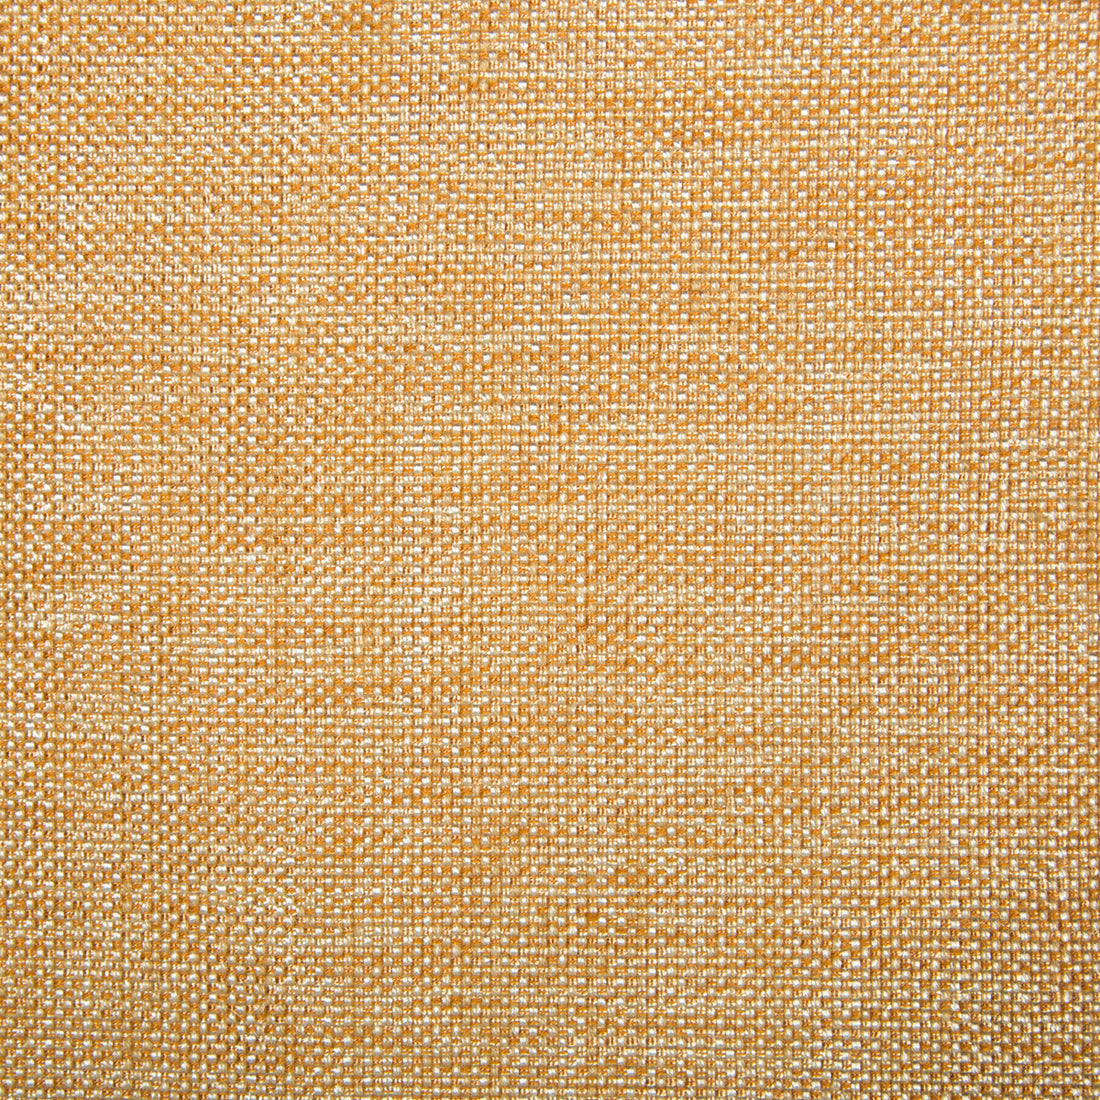 Kravet Contract fabric in 4458-1211 color - pattern 4458.1211.0 - by Kravet Contract